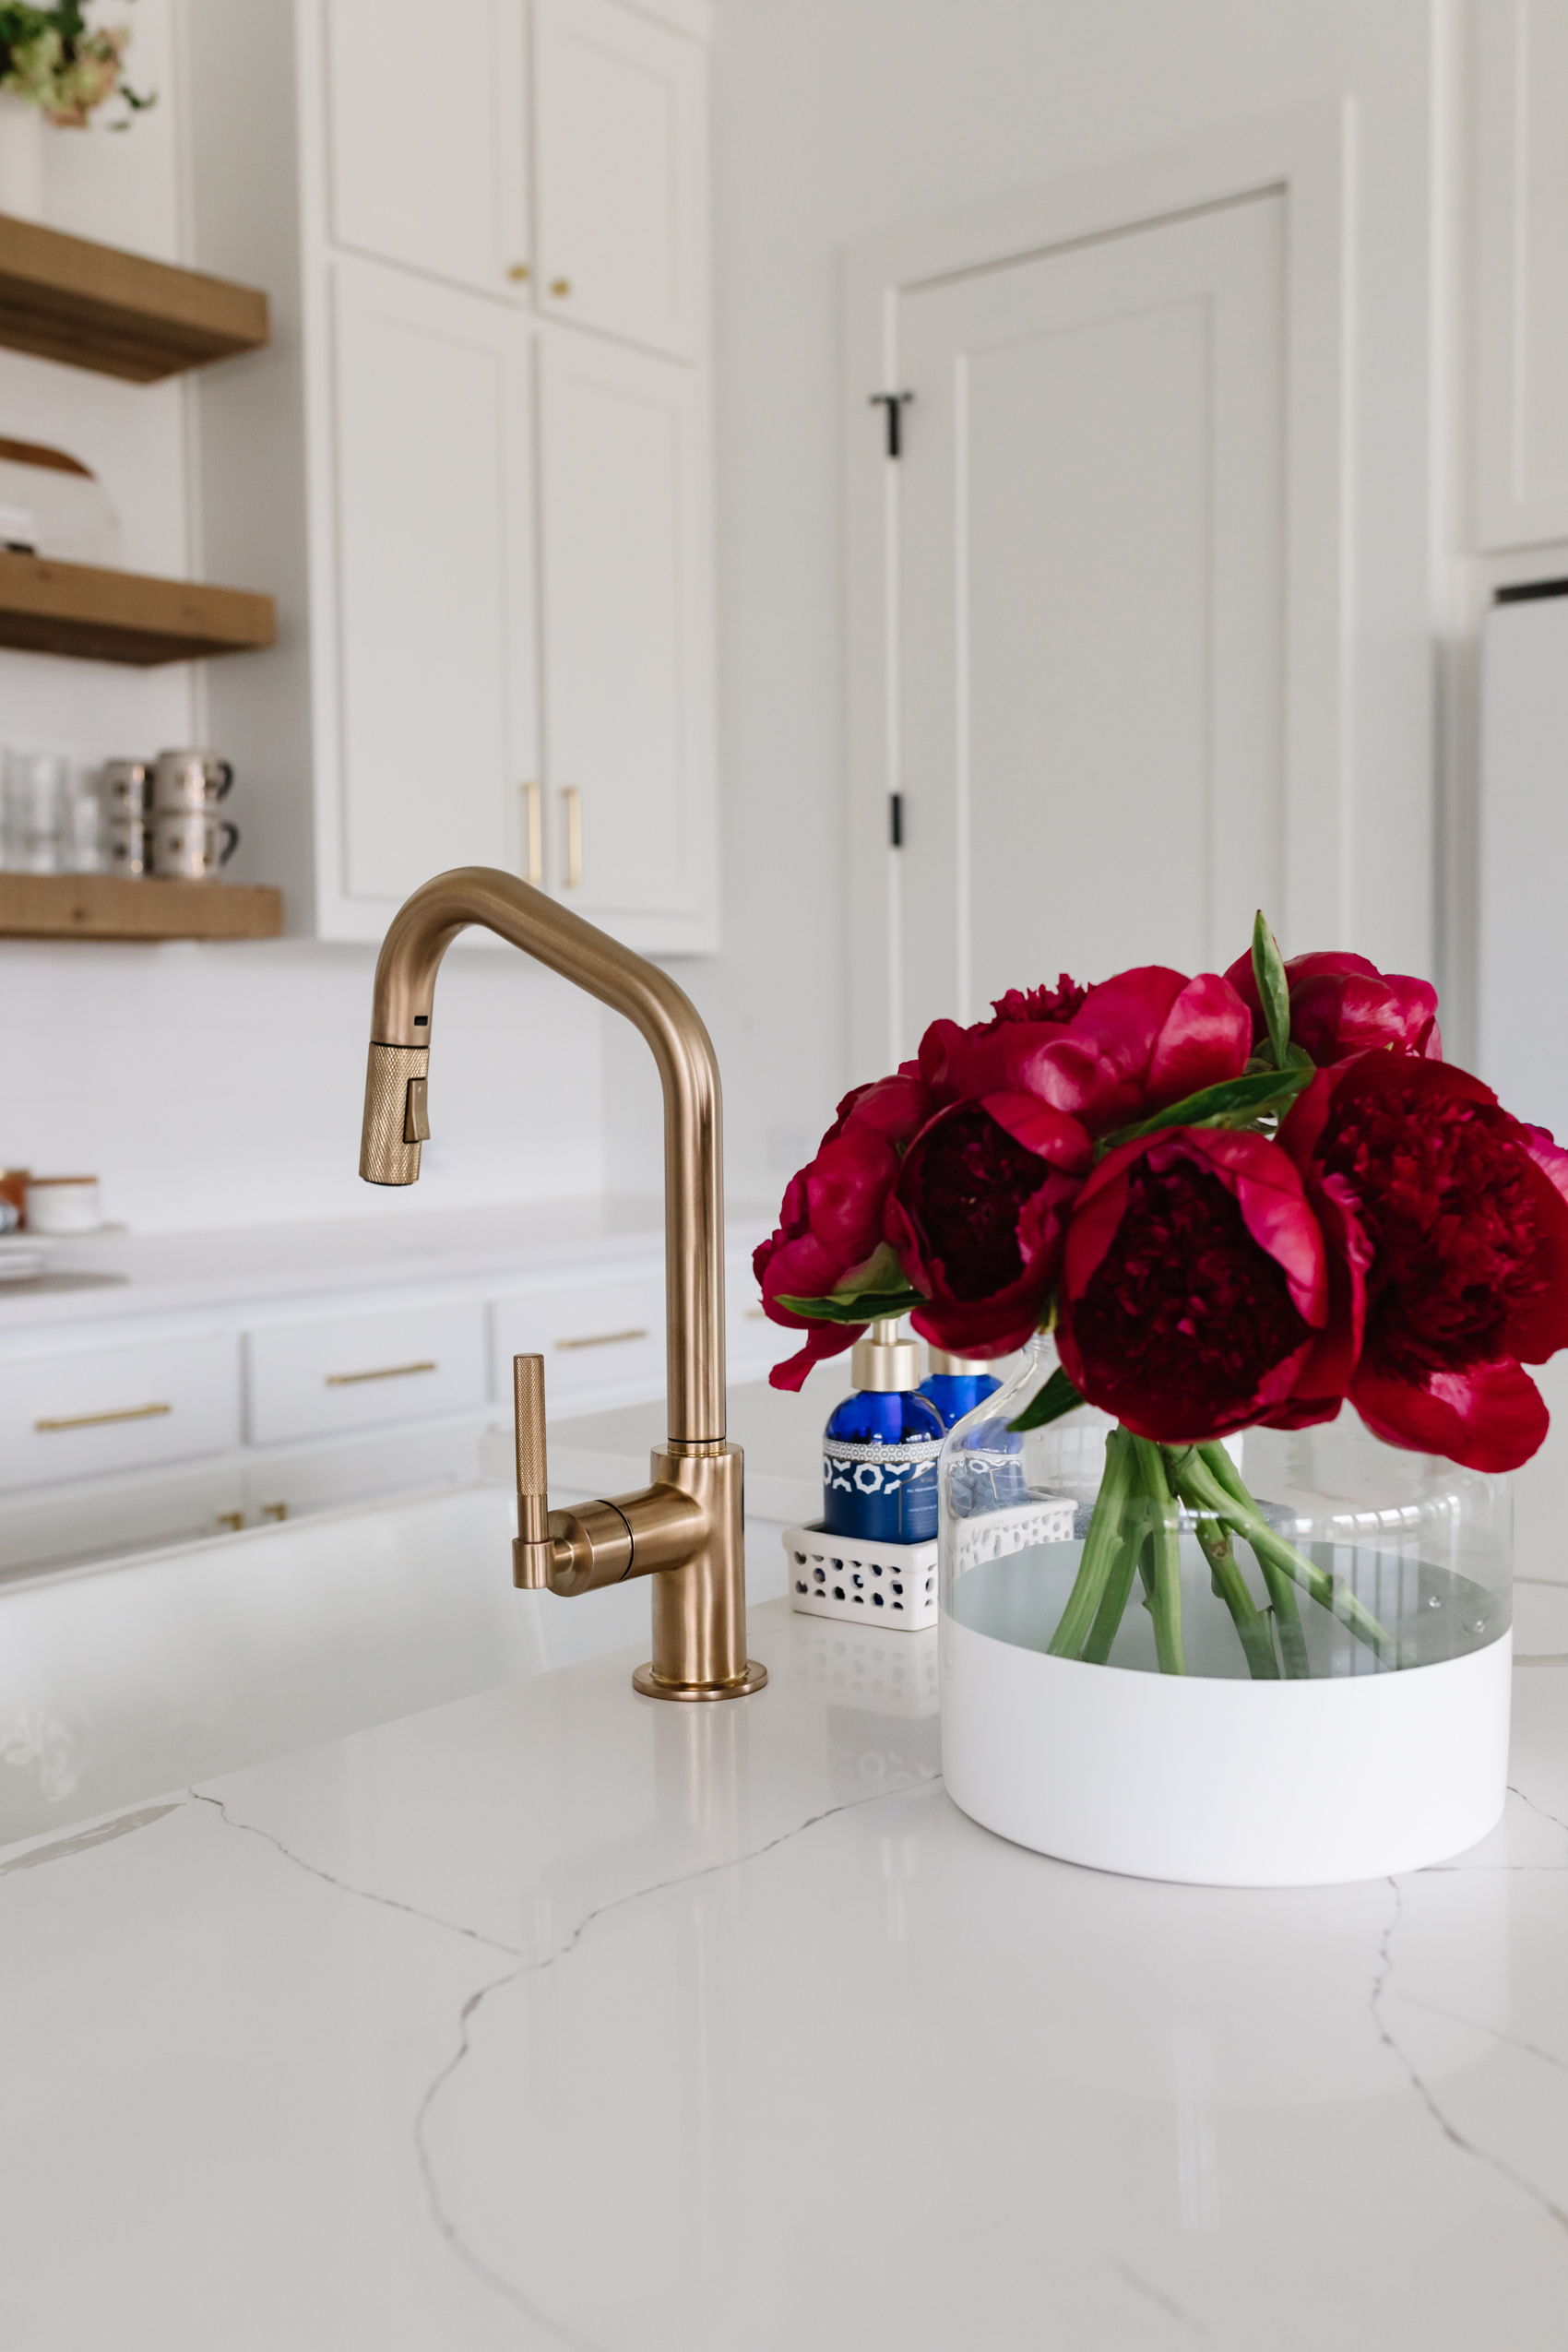 Brizo Litze Angled Pull Down faucet with knurled handle, Kohler Whitehaven farmhouse sink in a transitional kitchen with Serena and Lily Poetto vase with red peonies